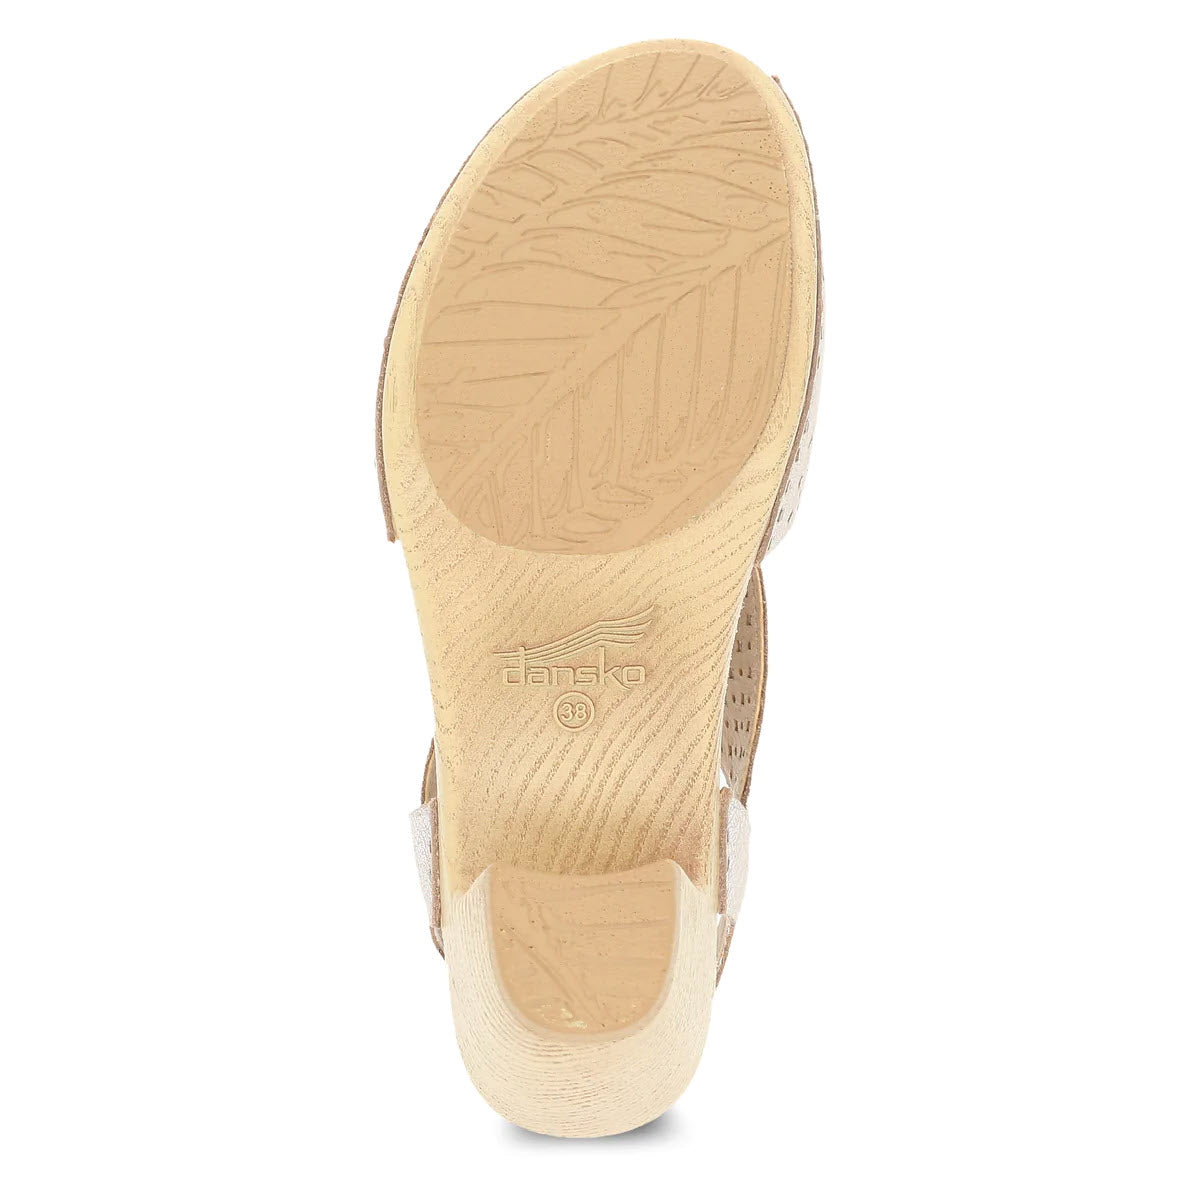 Bottom view of a beige Dansko Teagan heeled slingback displaying the textured sole pattern and brand logo.